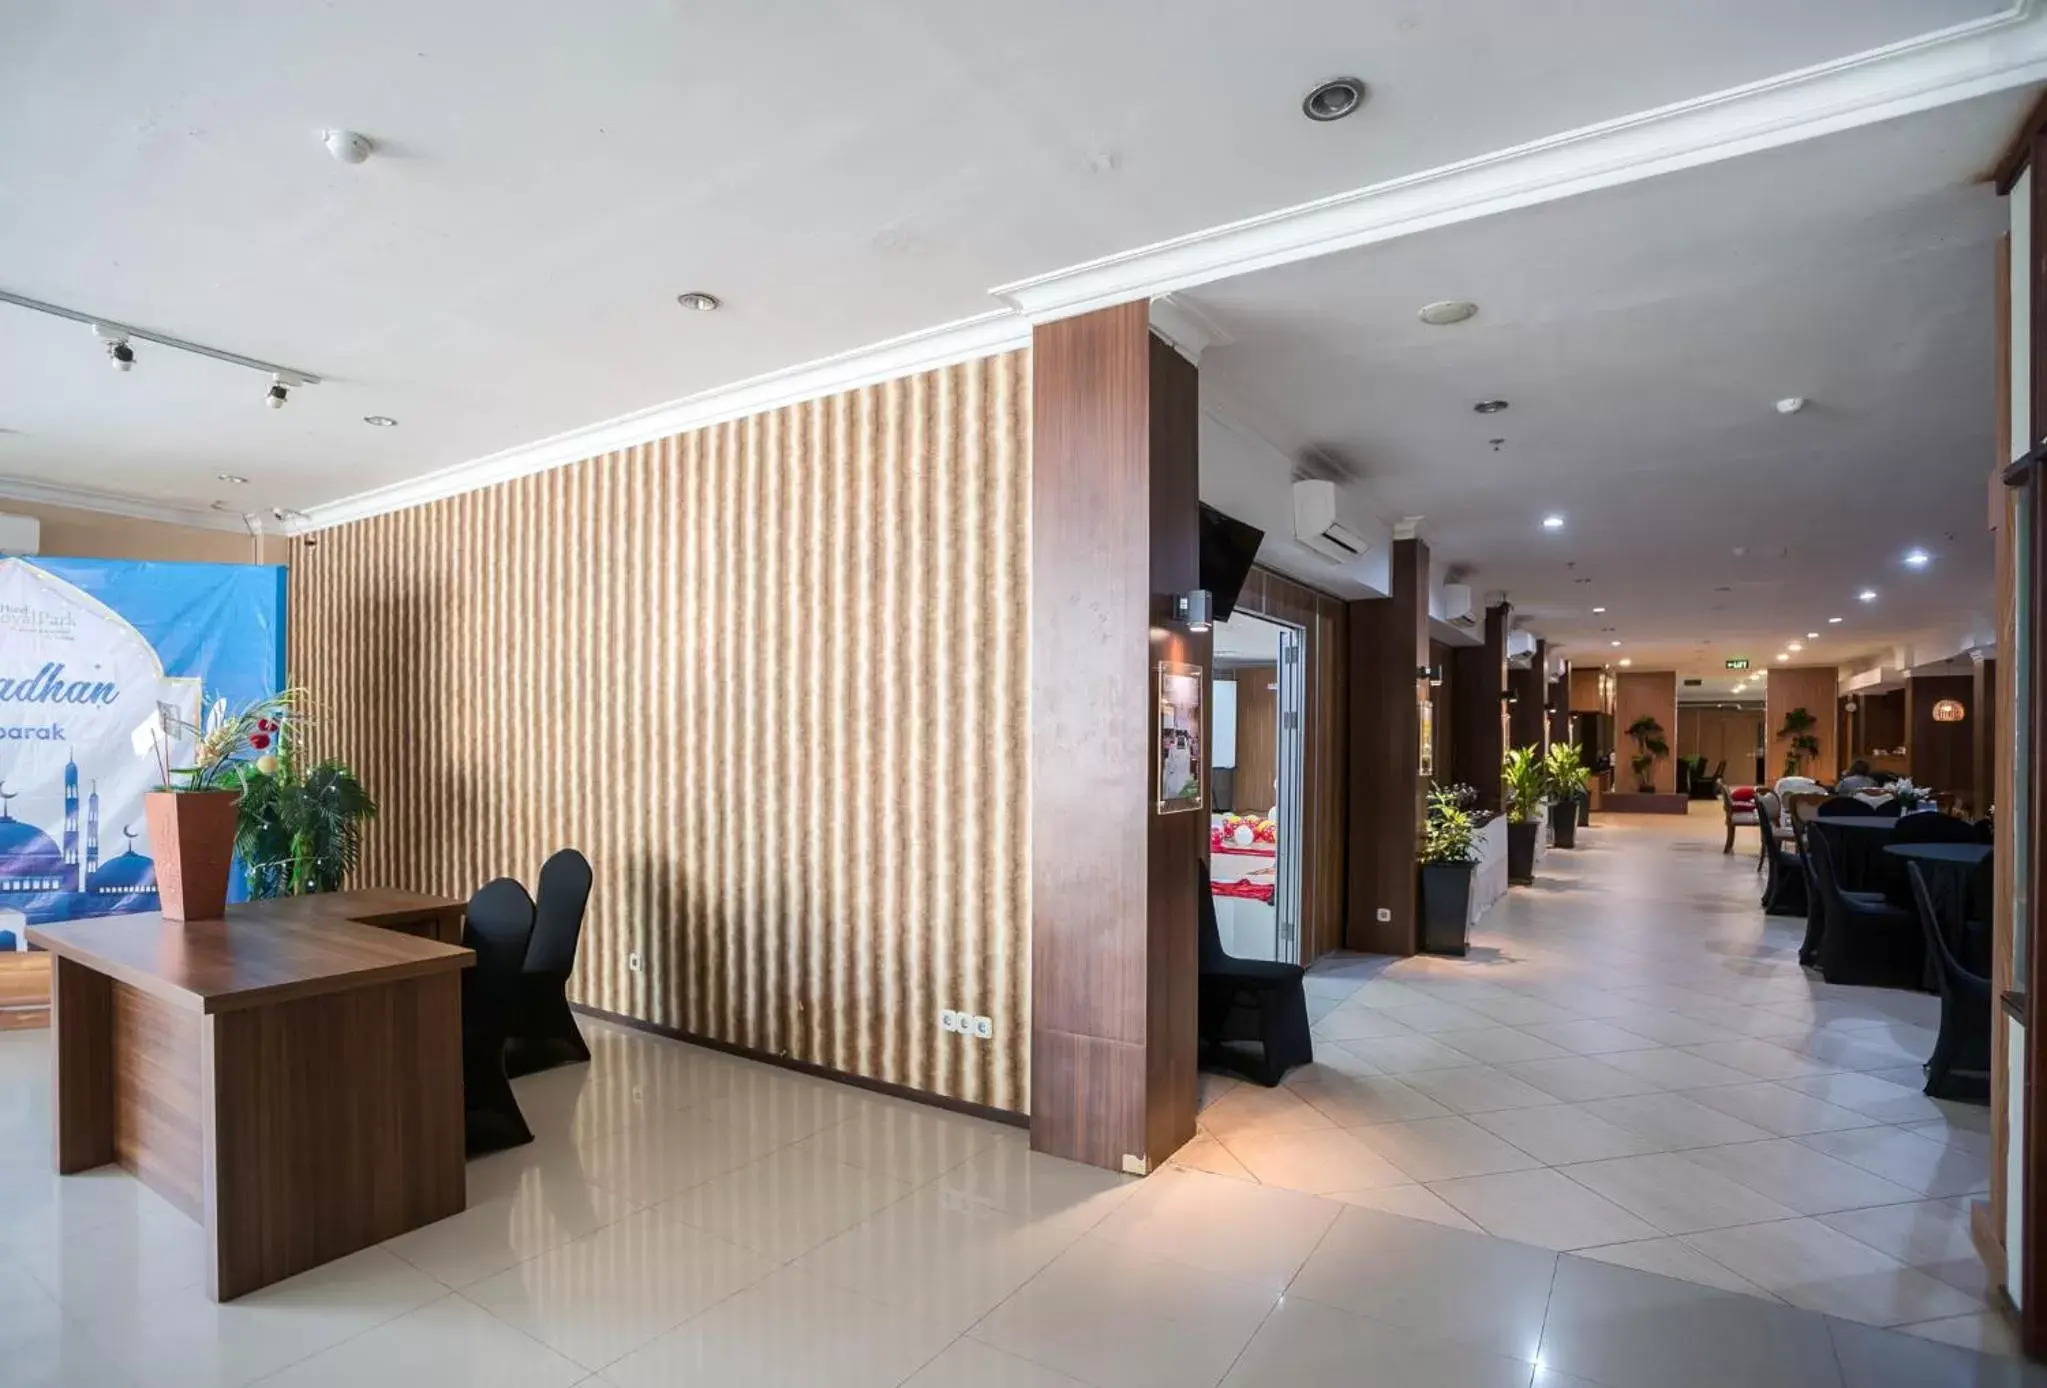 Meeting/conference room, Lobby/Reception in Royal Park Hotel